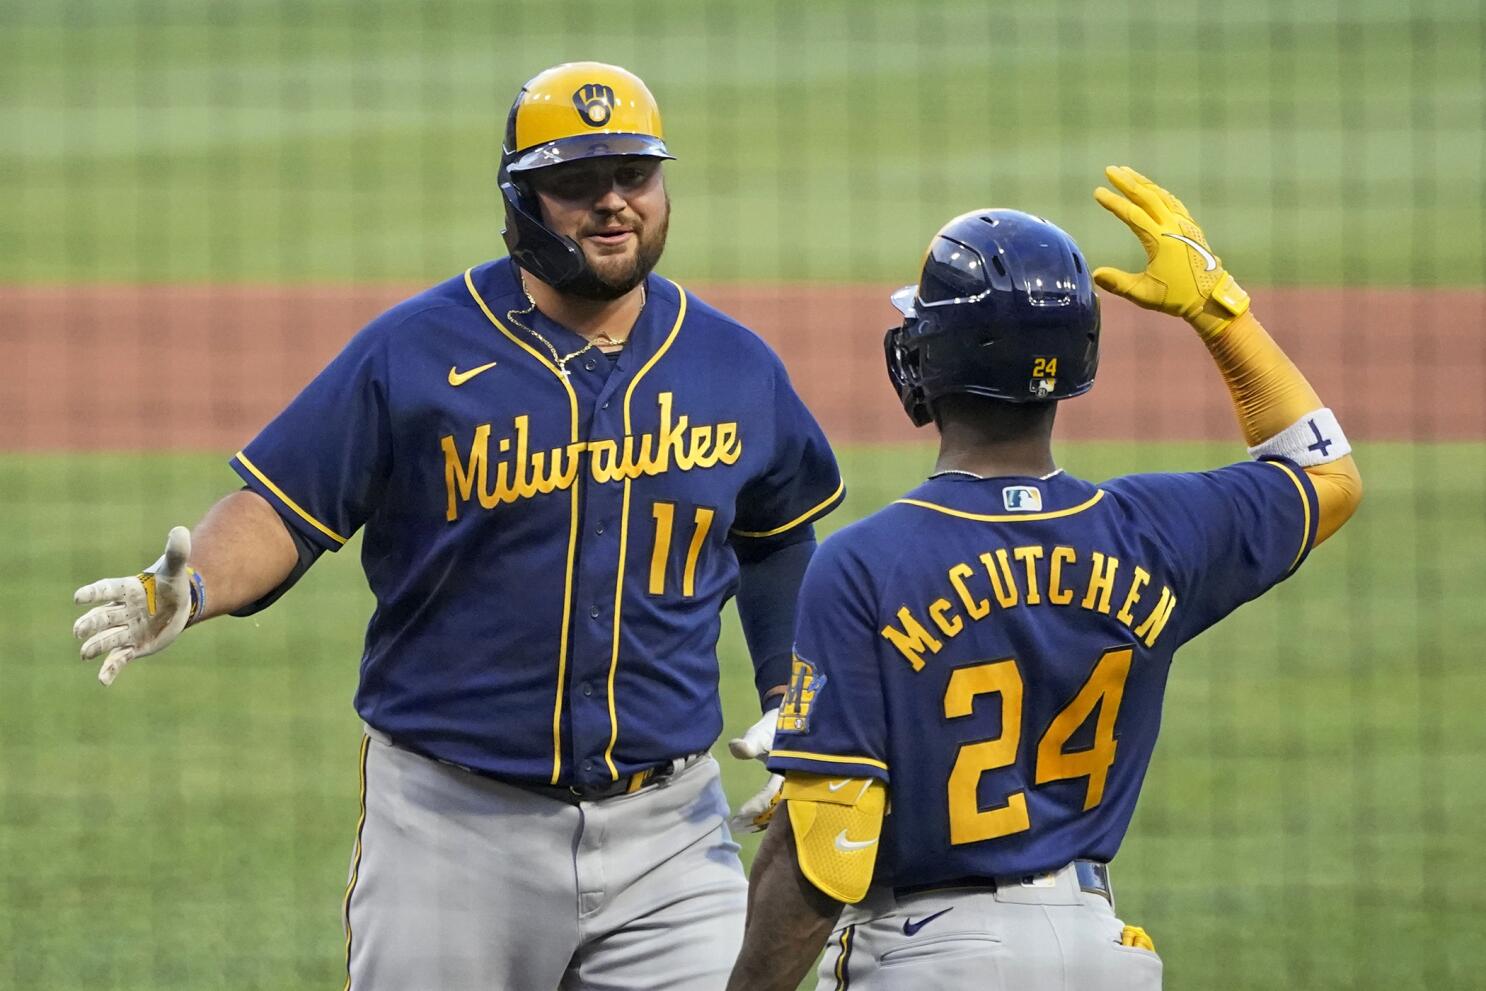 Can Rowdy Tellez become third Brewer with back-to-back 35-HR seasons?